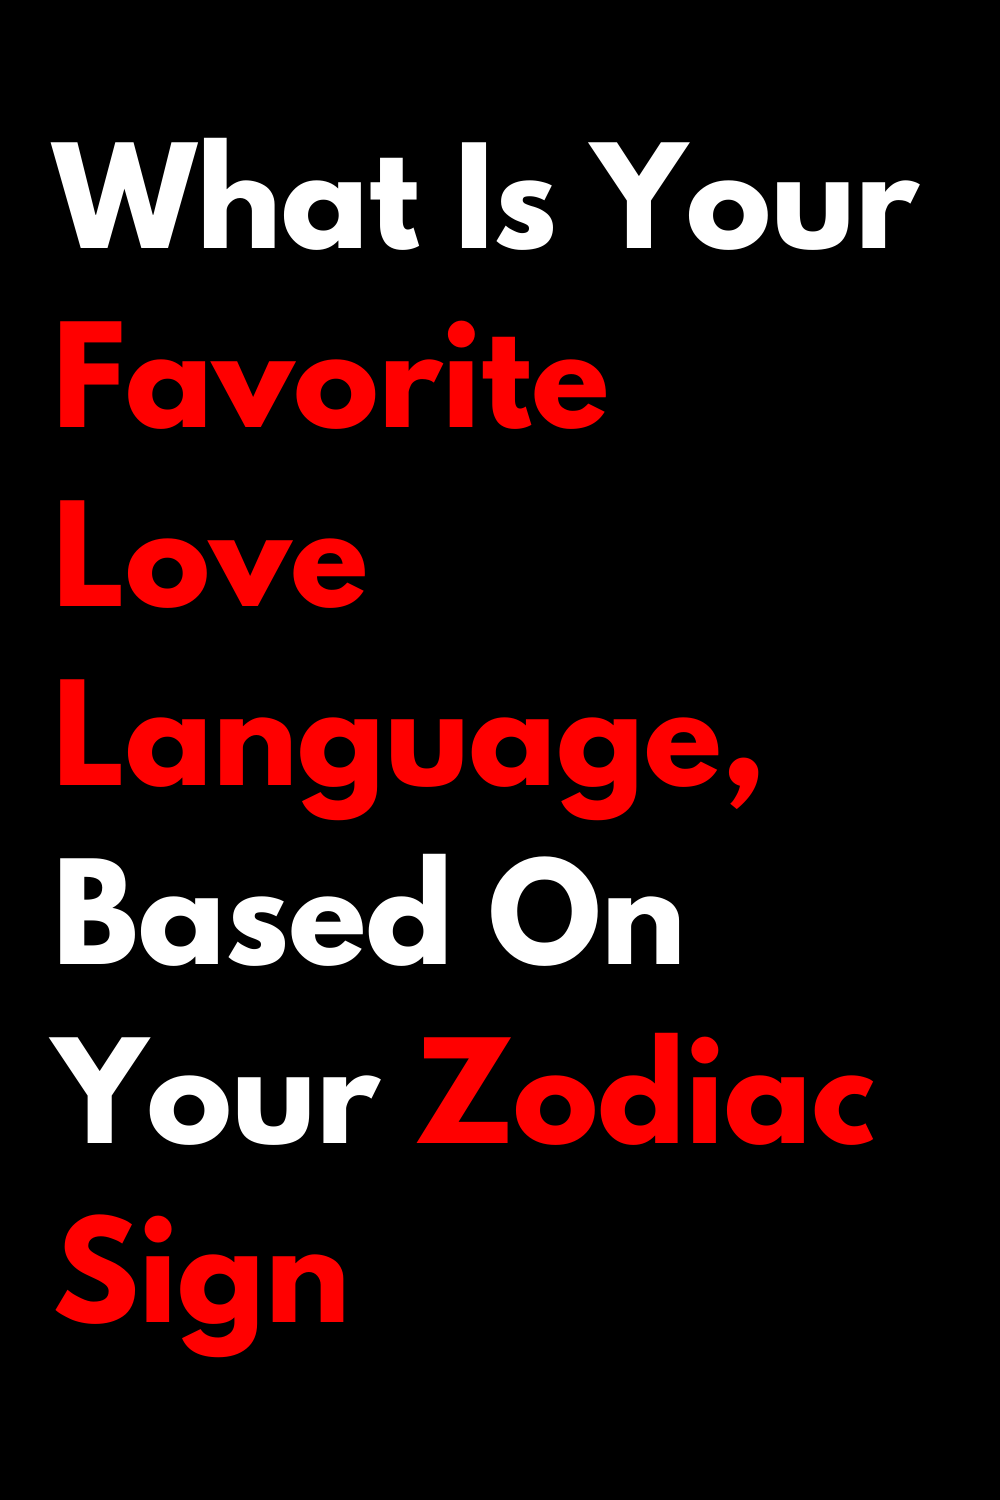 What Is Your Favorite Love Language, Based On Your Zodiac Sign